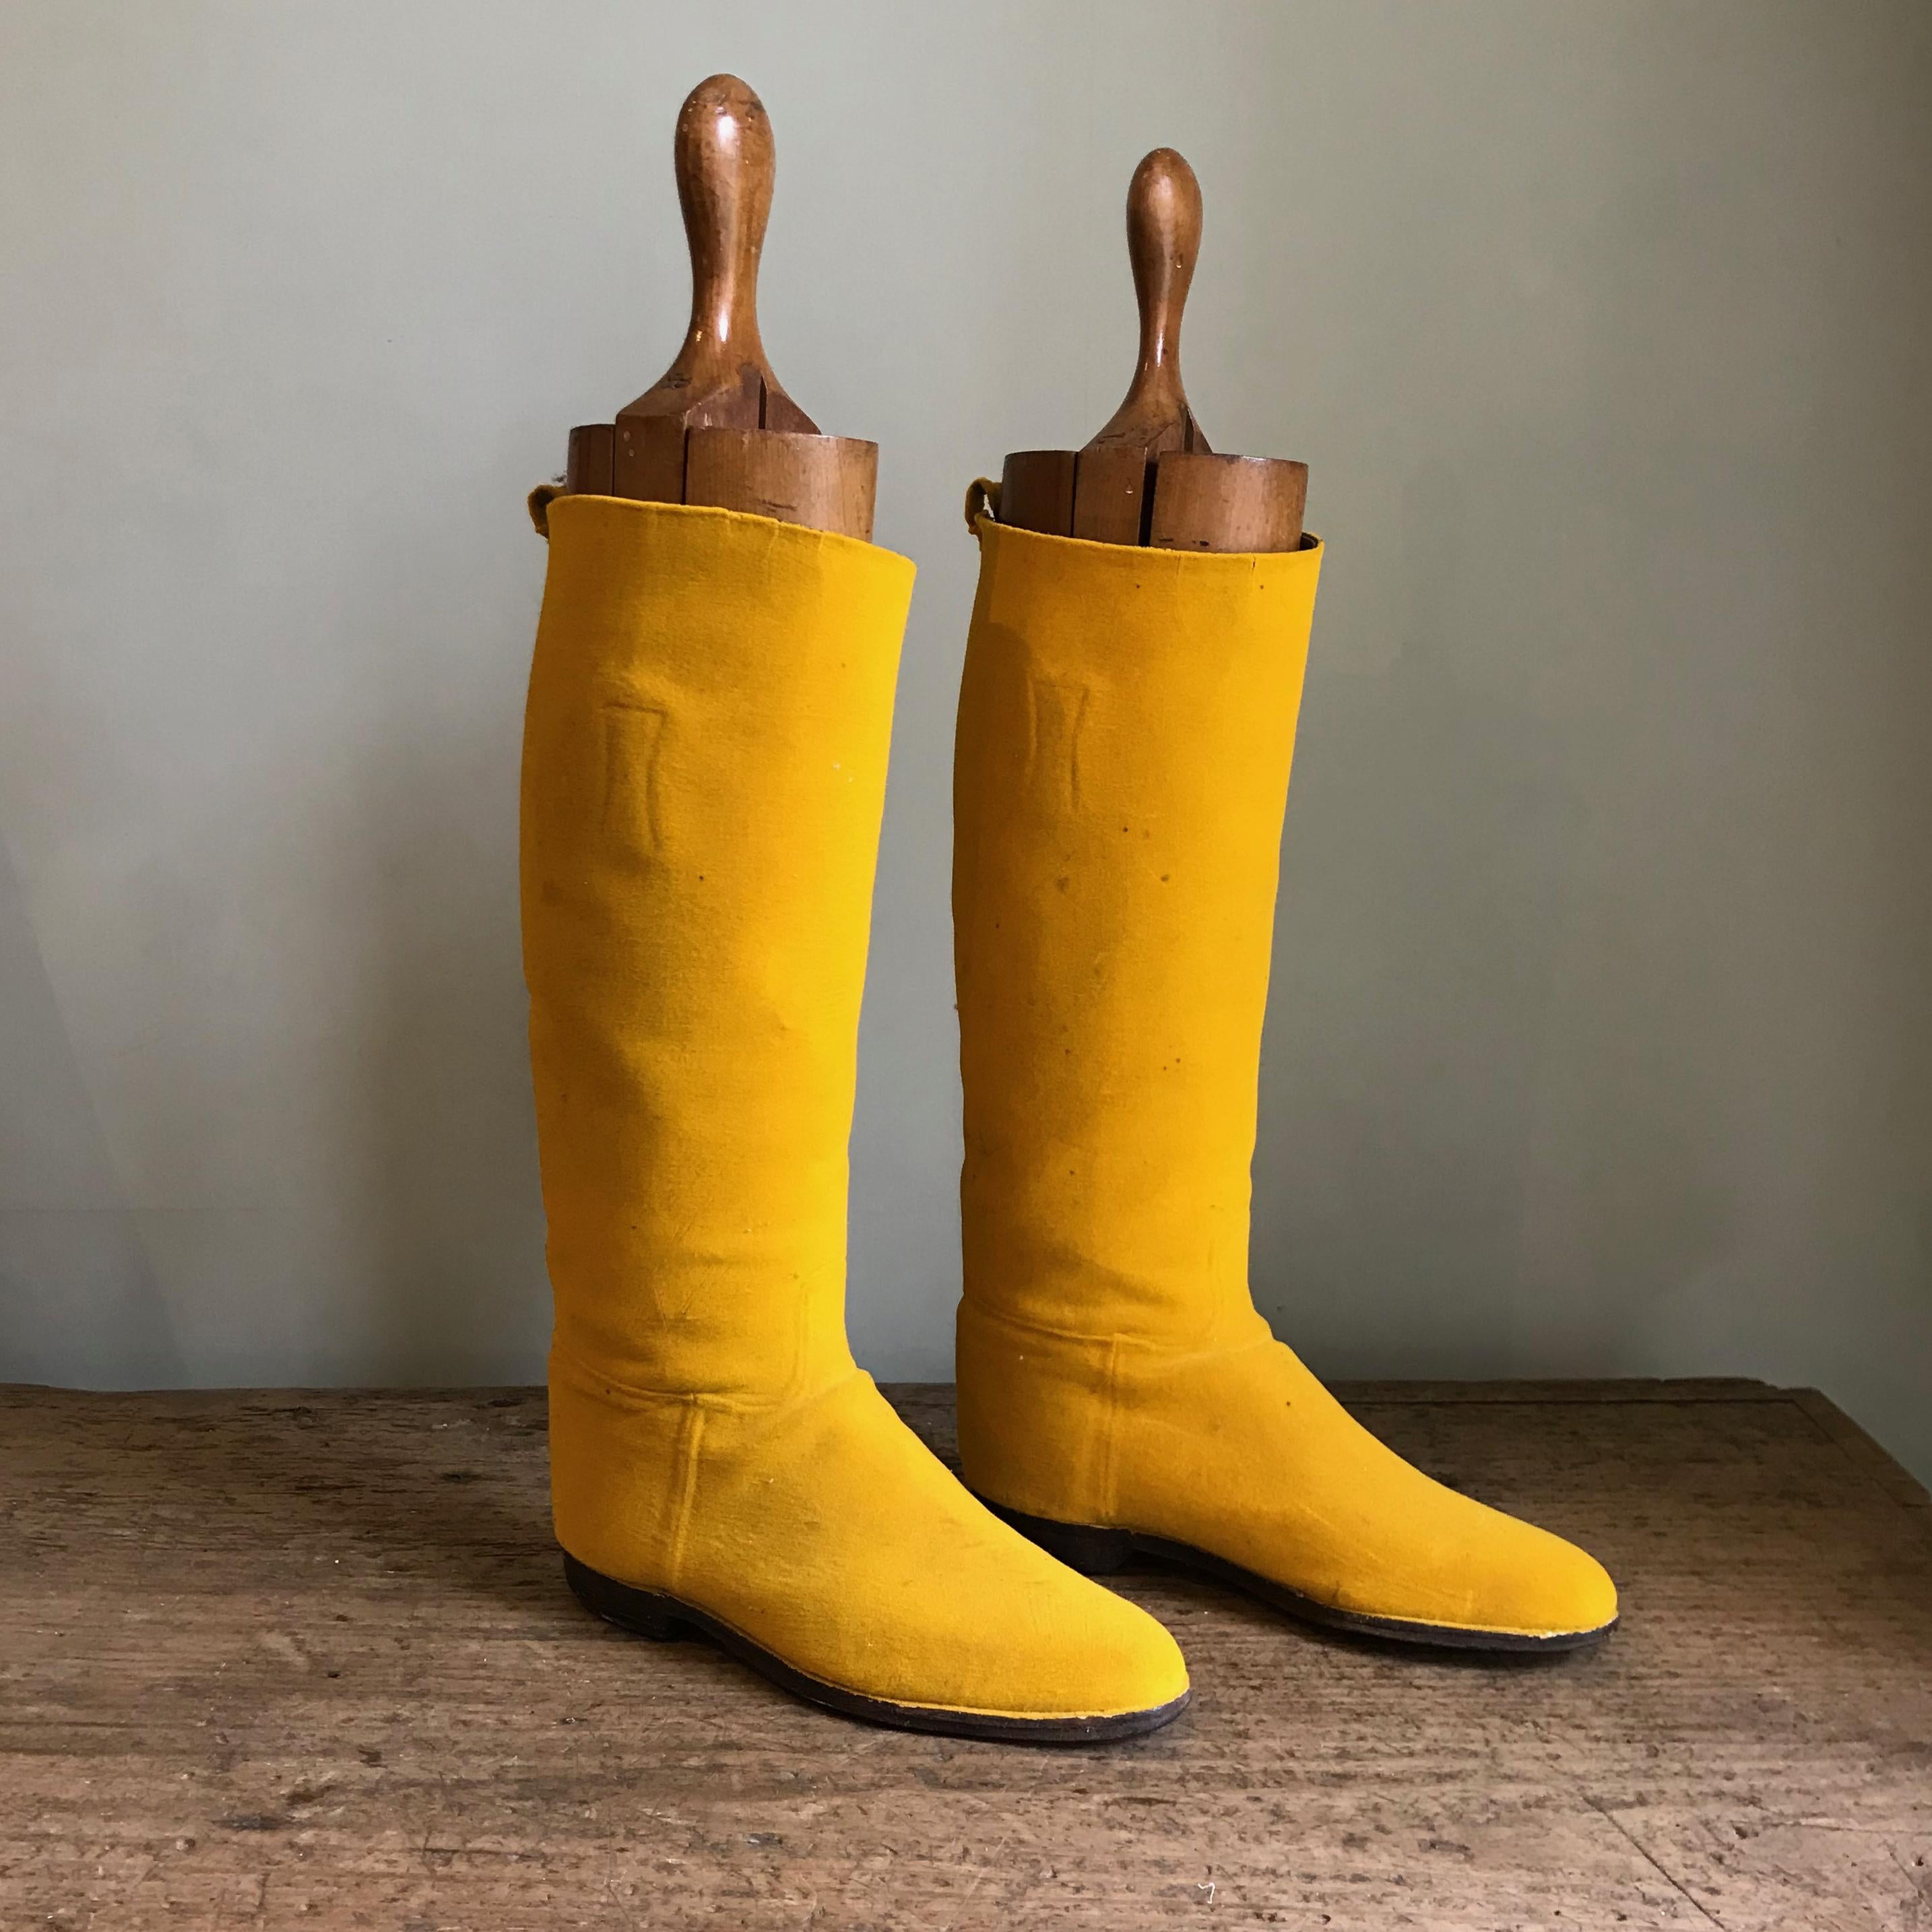 A pair of unique English Edwardian riding boots in yellow.

The boots have been flocked in this wonderful color at some stage in their life giving them this fantastic appearance.